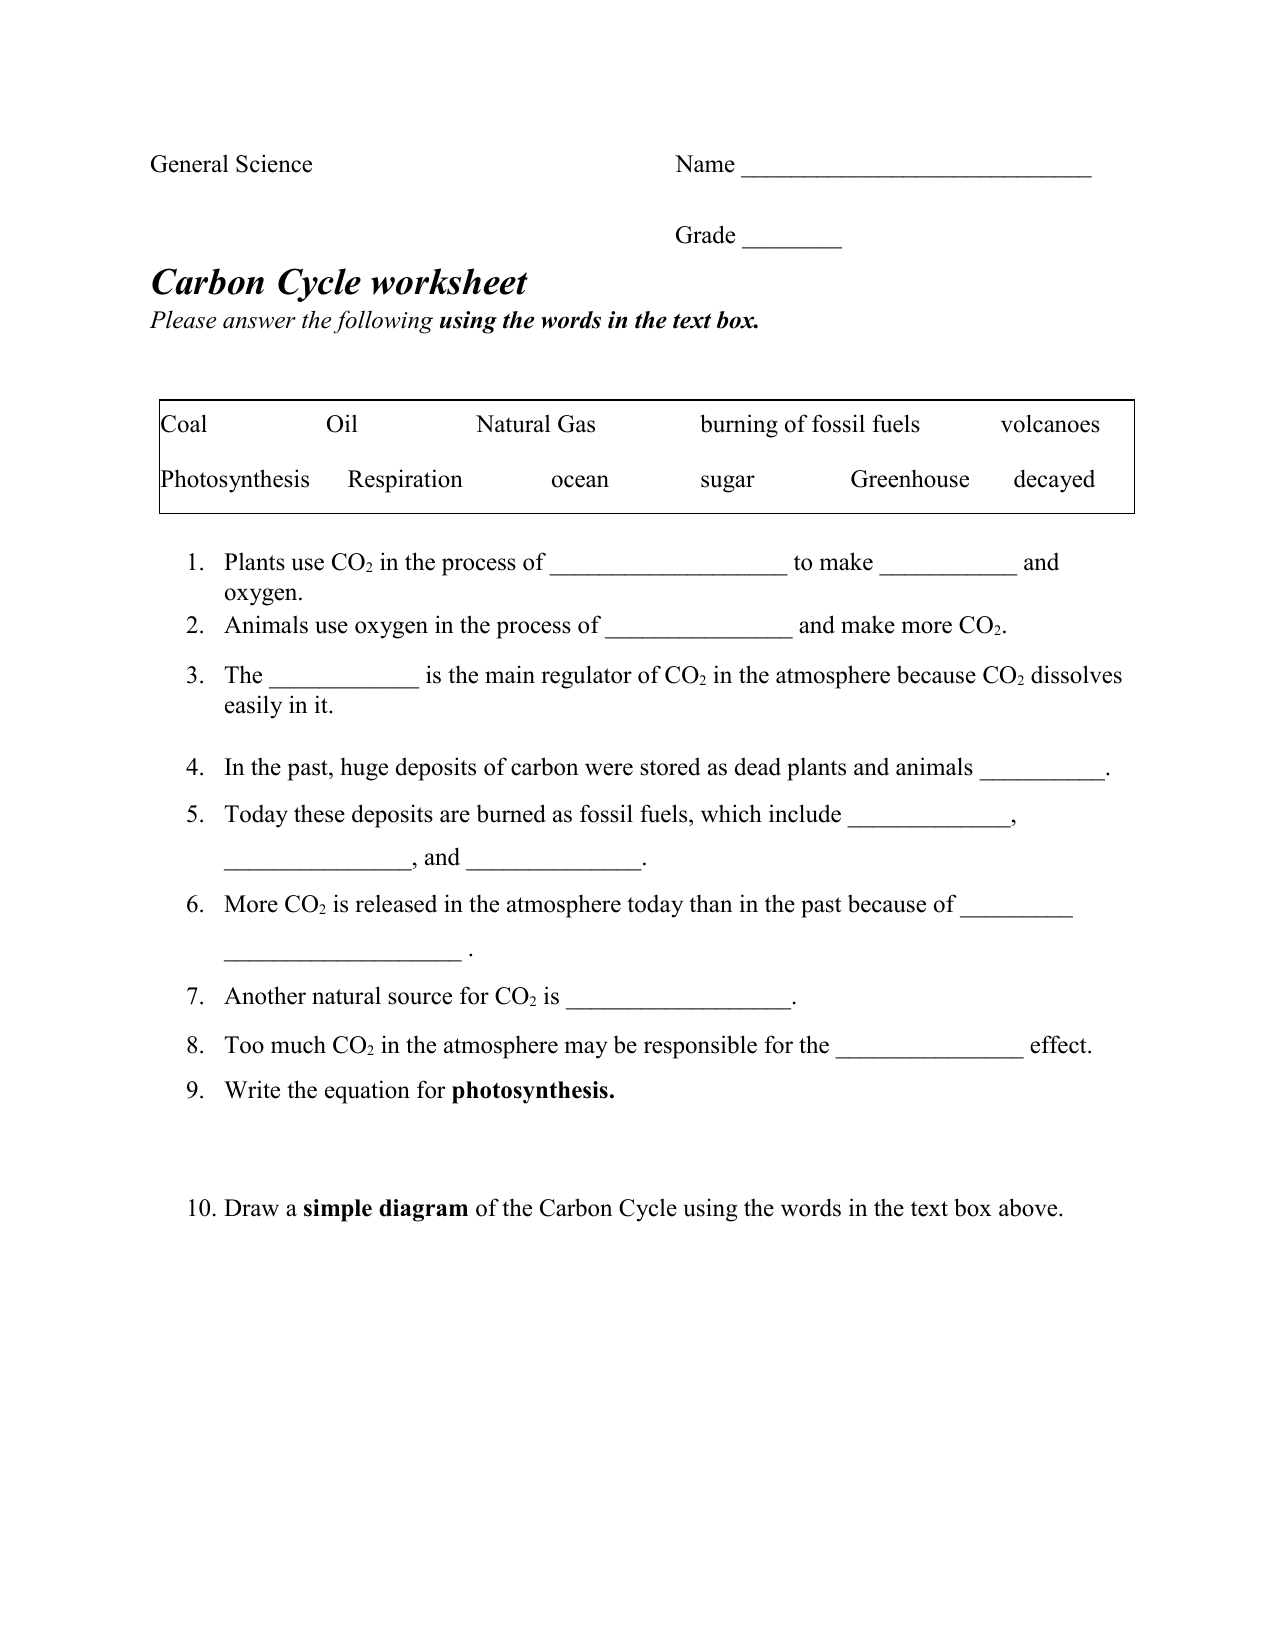 Carbon cycle worksheet For Carbon Cycle Worksheet Answers